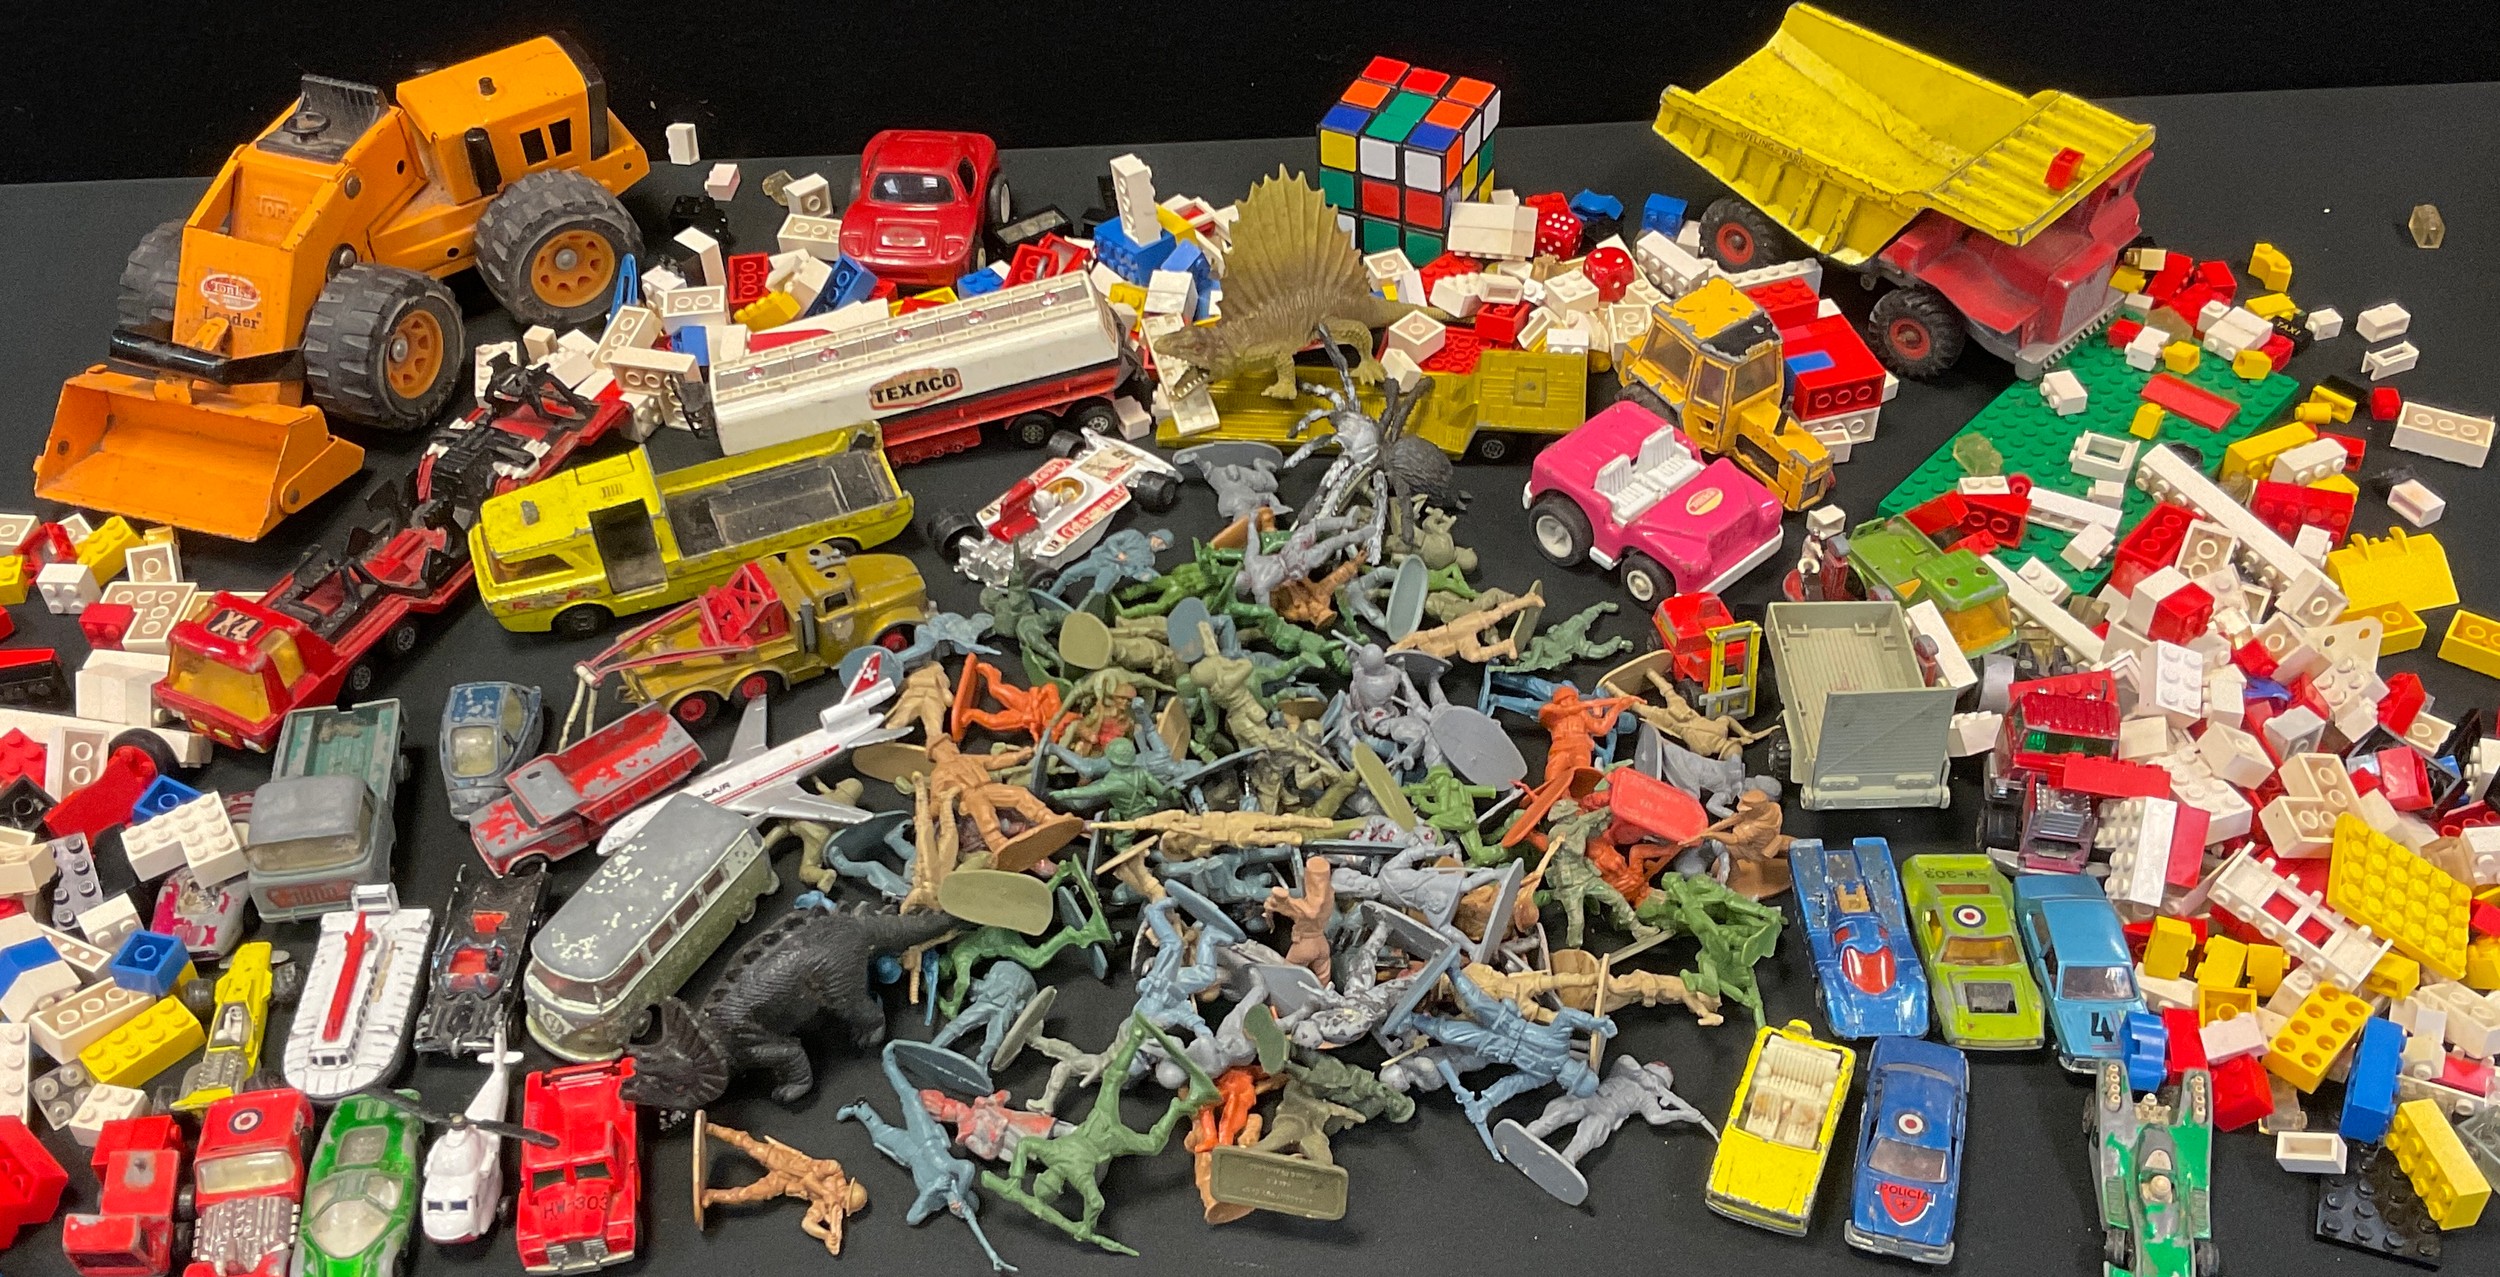 Toys - Diecast Vehicles, Tonka vehicles, Airfix and other plastic soldiers, Lego etc